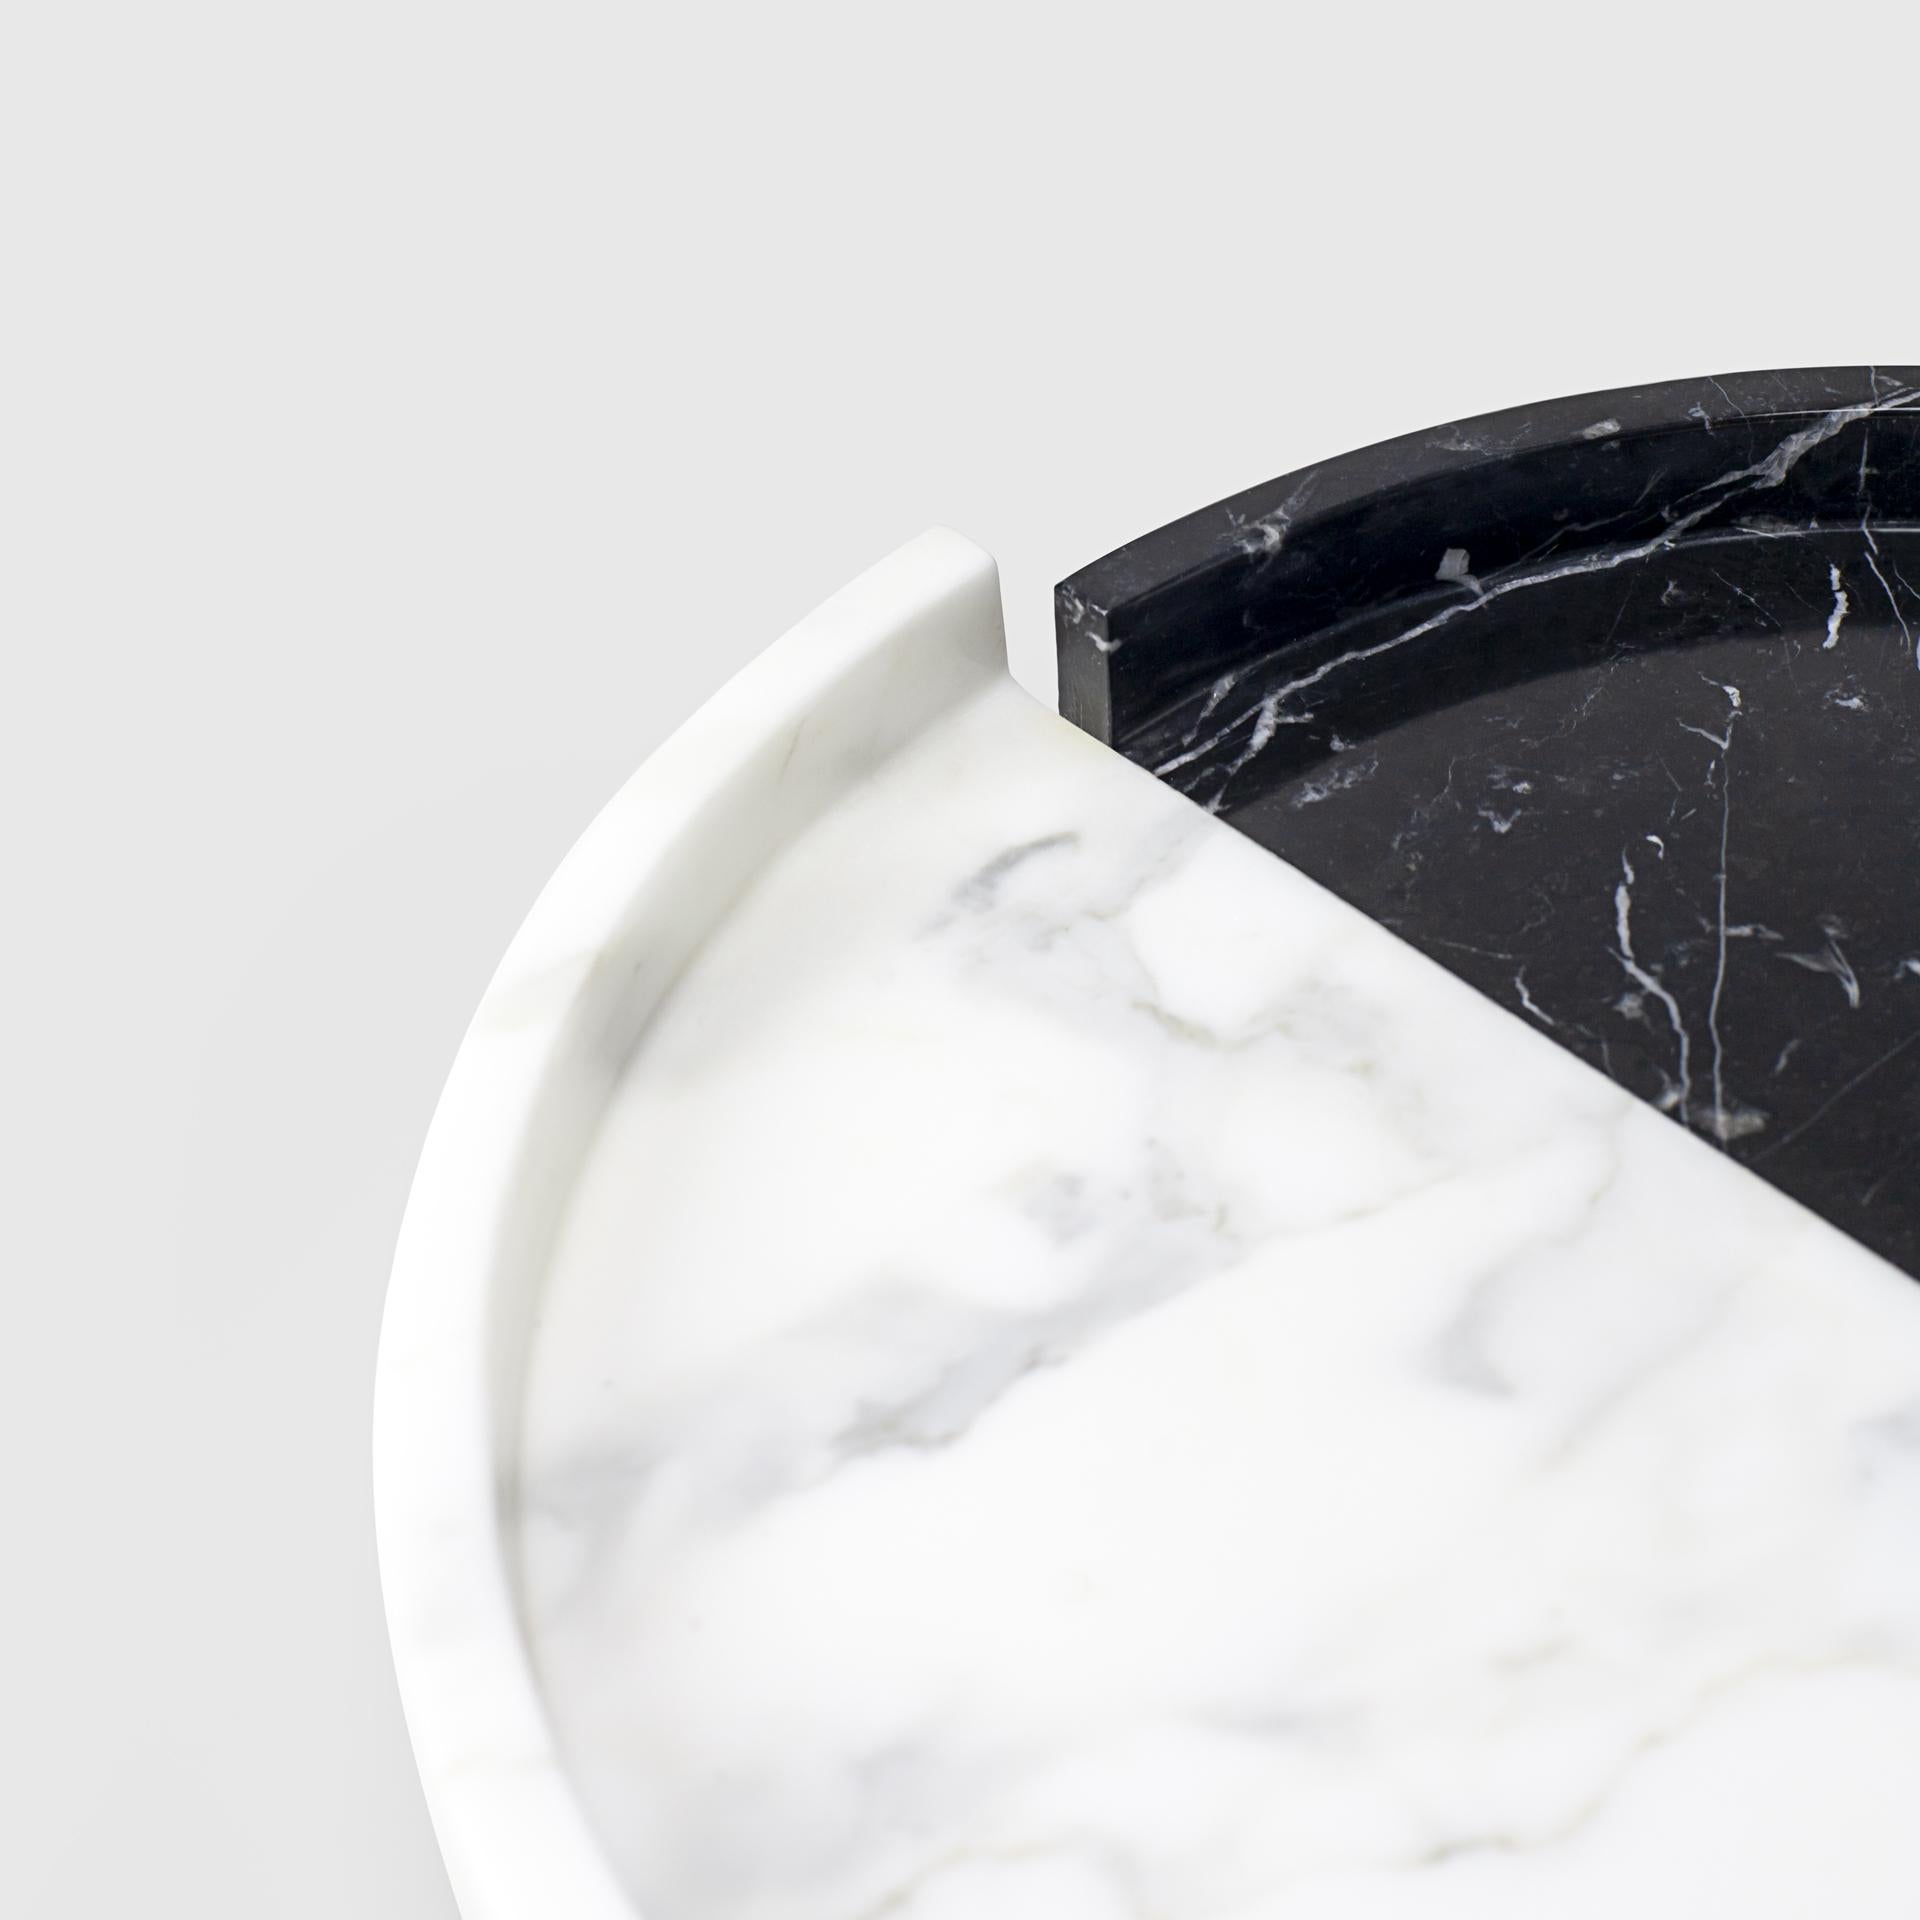 Statuary Marble Italian Marble Tray in Black and White, Minimalist Modern Design by Sandro Lopez For Sale